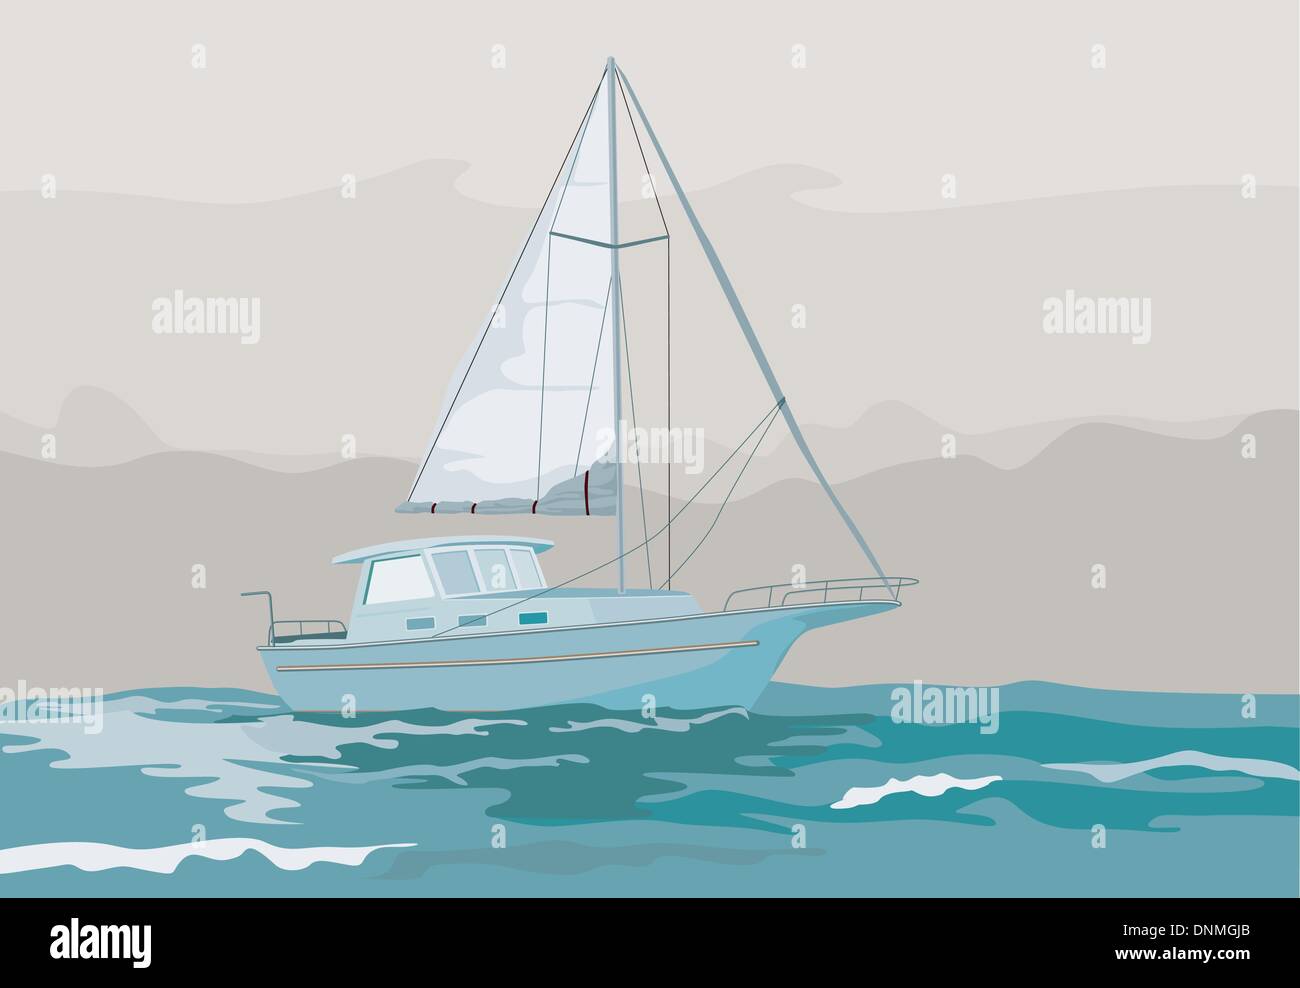 Illustration of a sailboat yacht done in retro style Stock Vector